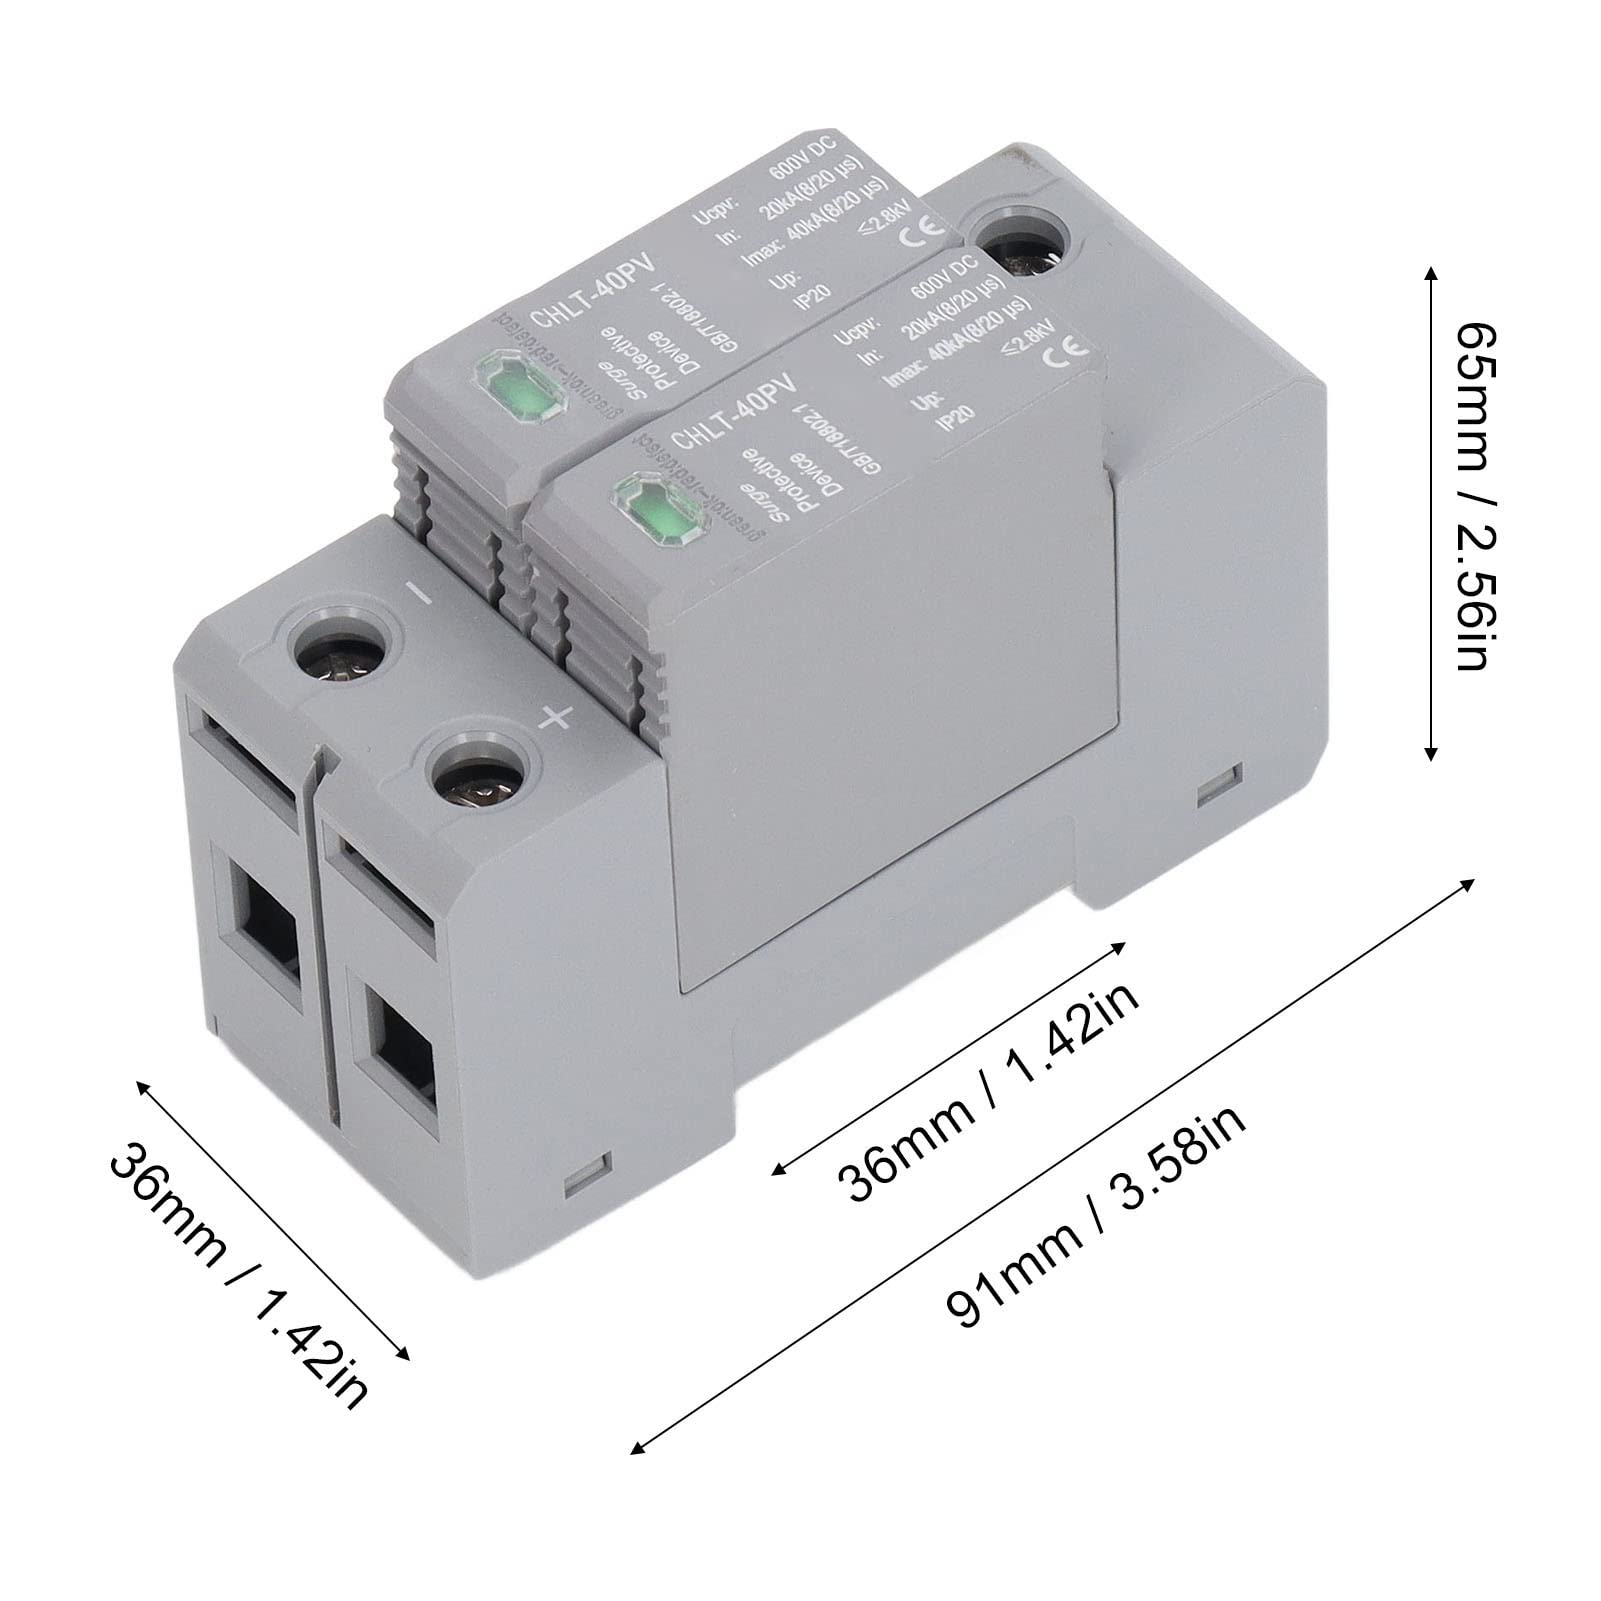 2P House Protective Device DC 600V 40KA 36mm DIN Rail Protector for Lightning Protection Safe Submission Device,CHLT 40PV